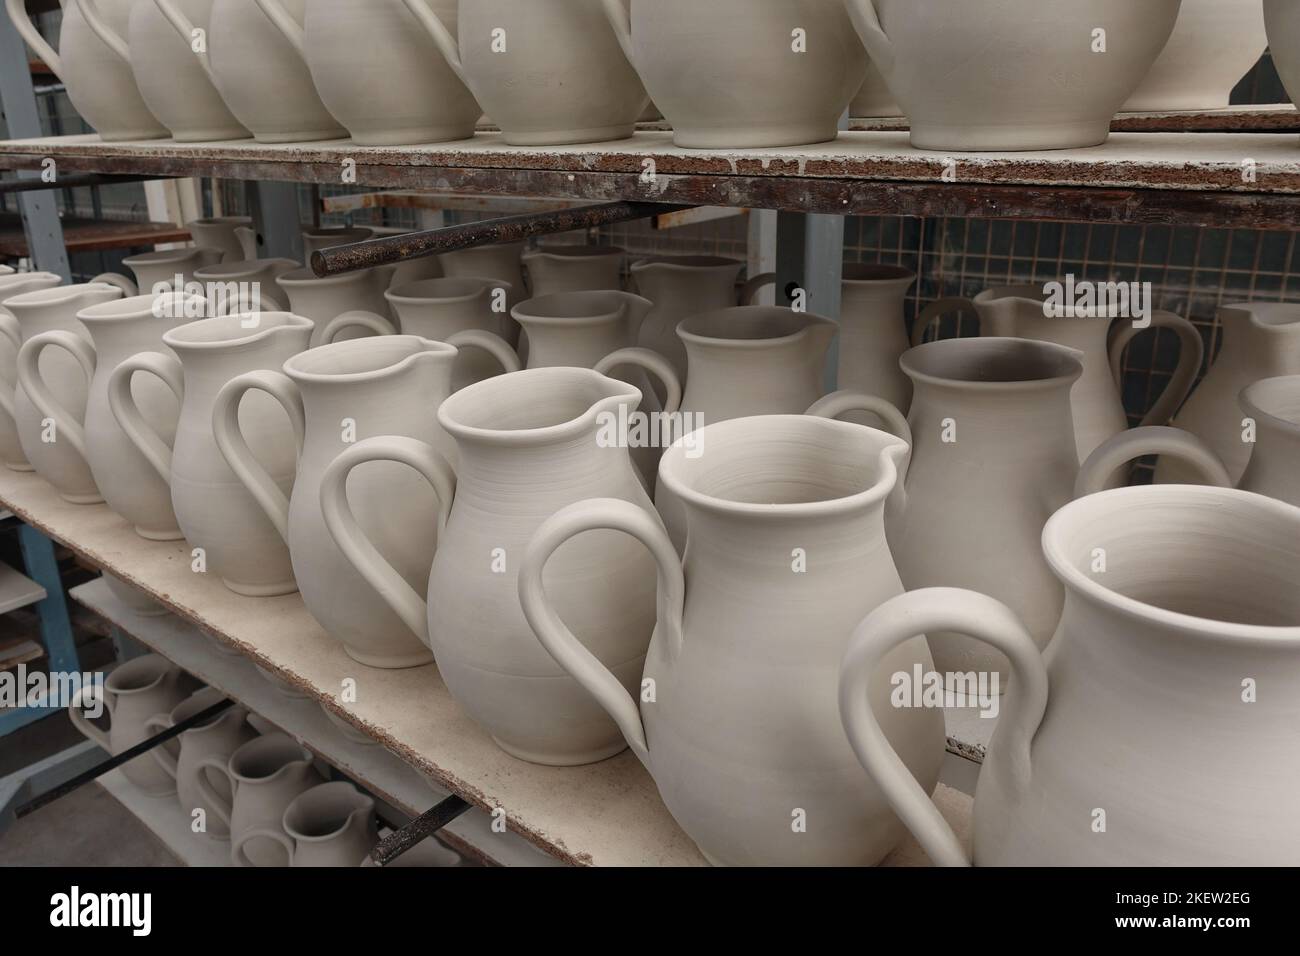 Pottery left out to dry before firing. Ceramic pitcher jugs. Stock Photo